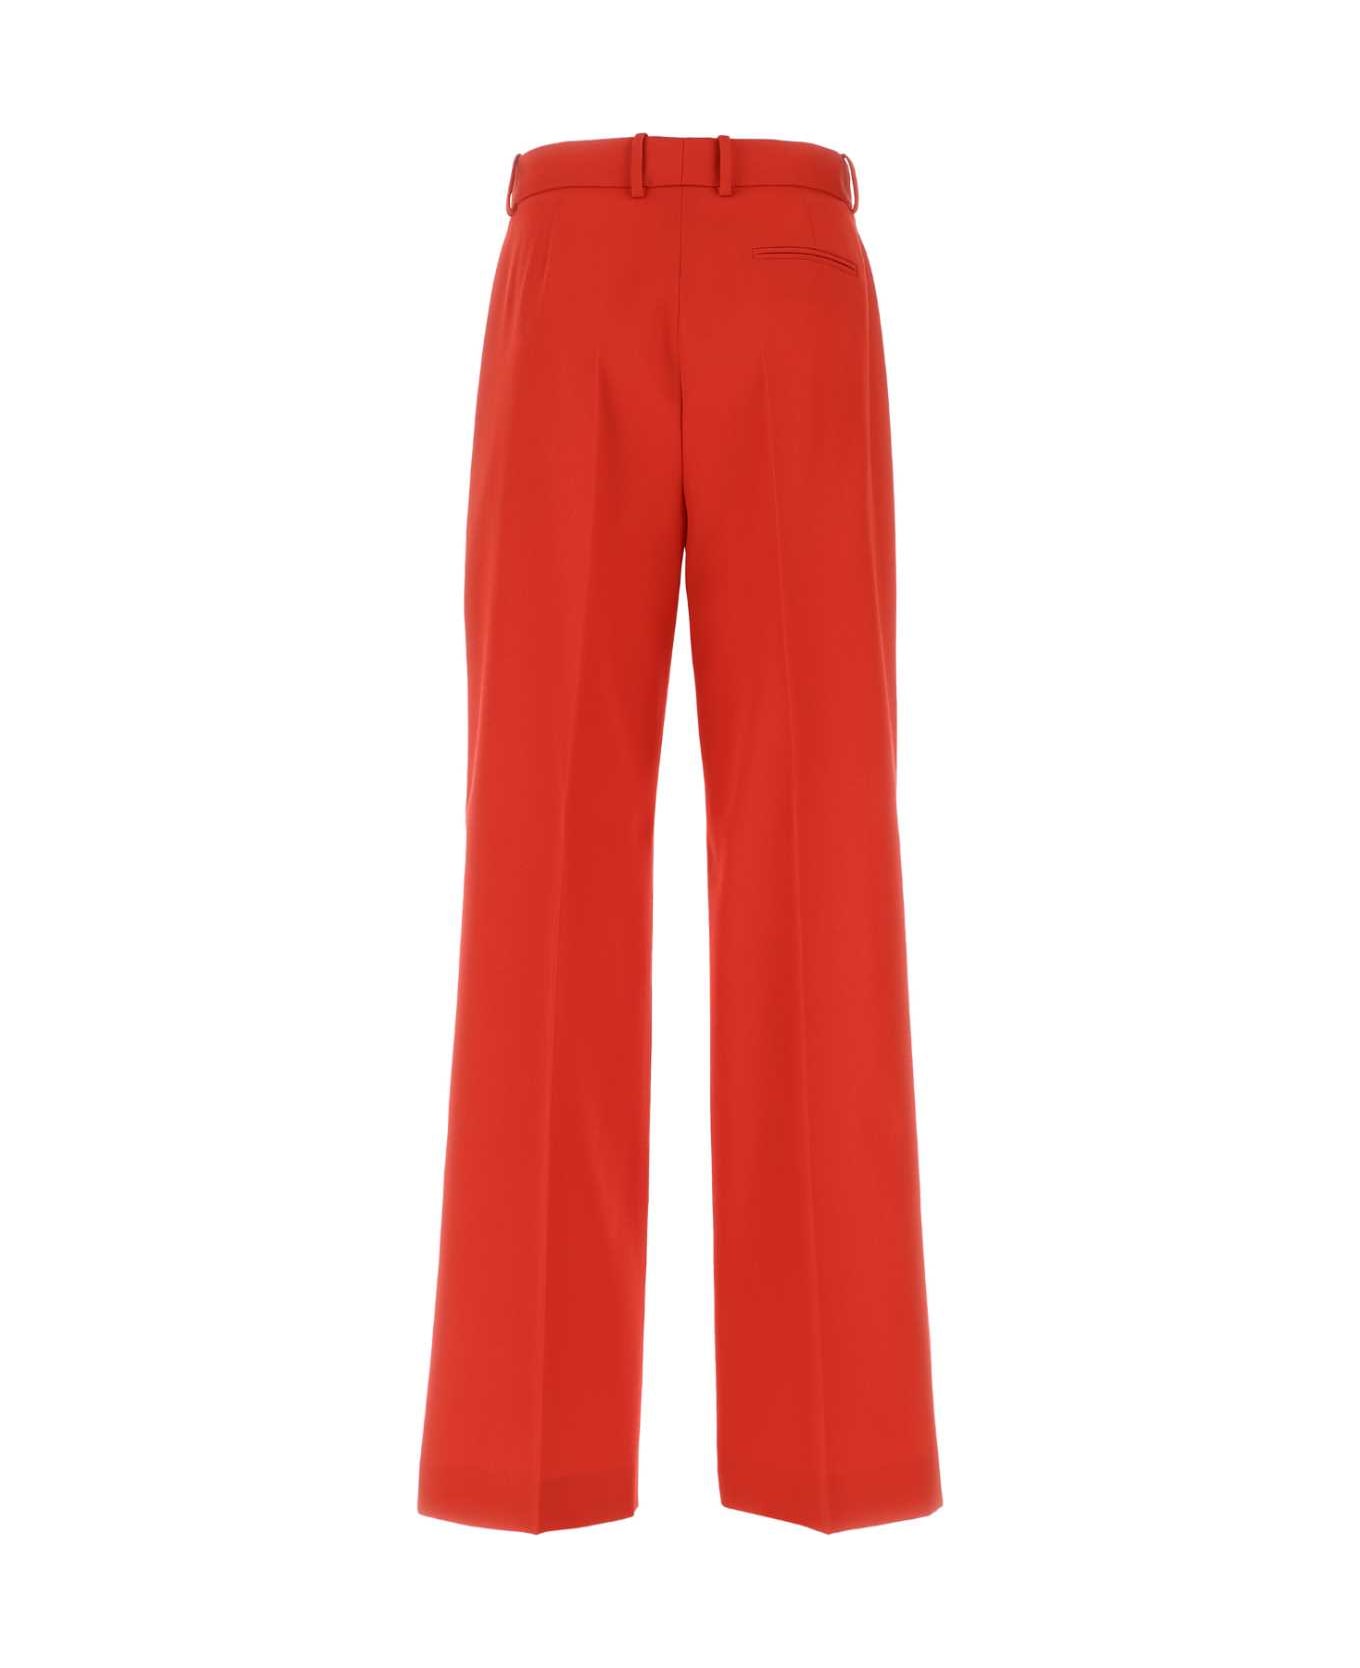 Lanvin Red Wool Wide-leg Pant - Red ボトムス